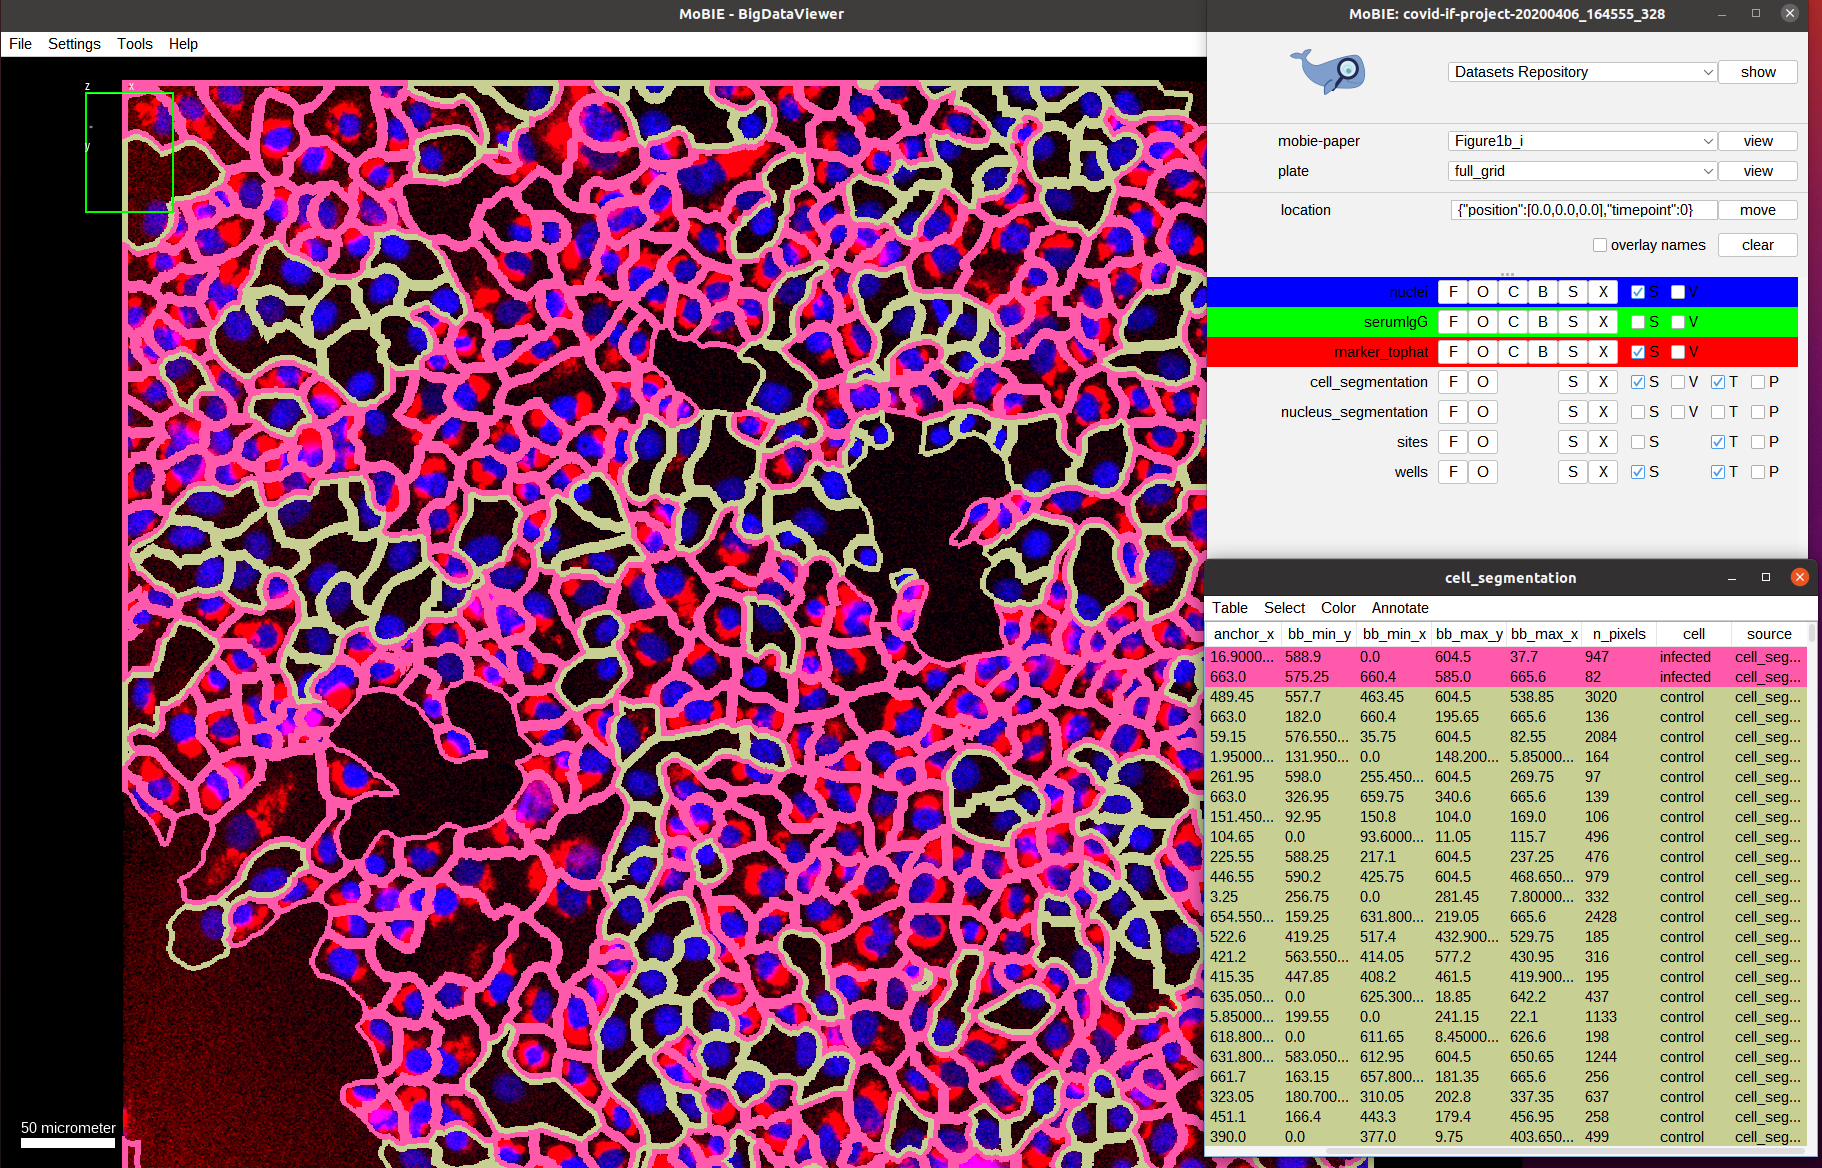 Cell segmentation overlay with infection classification